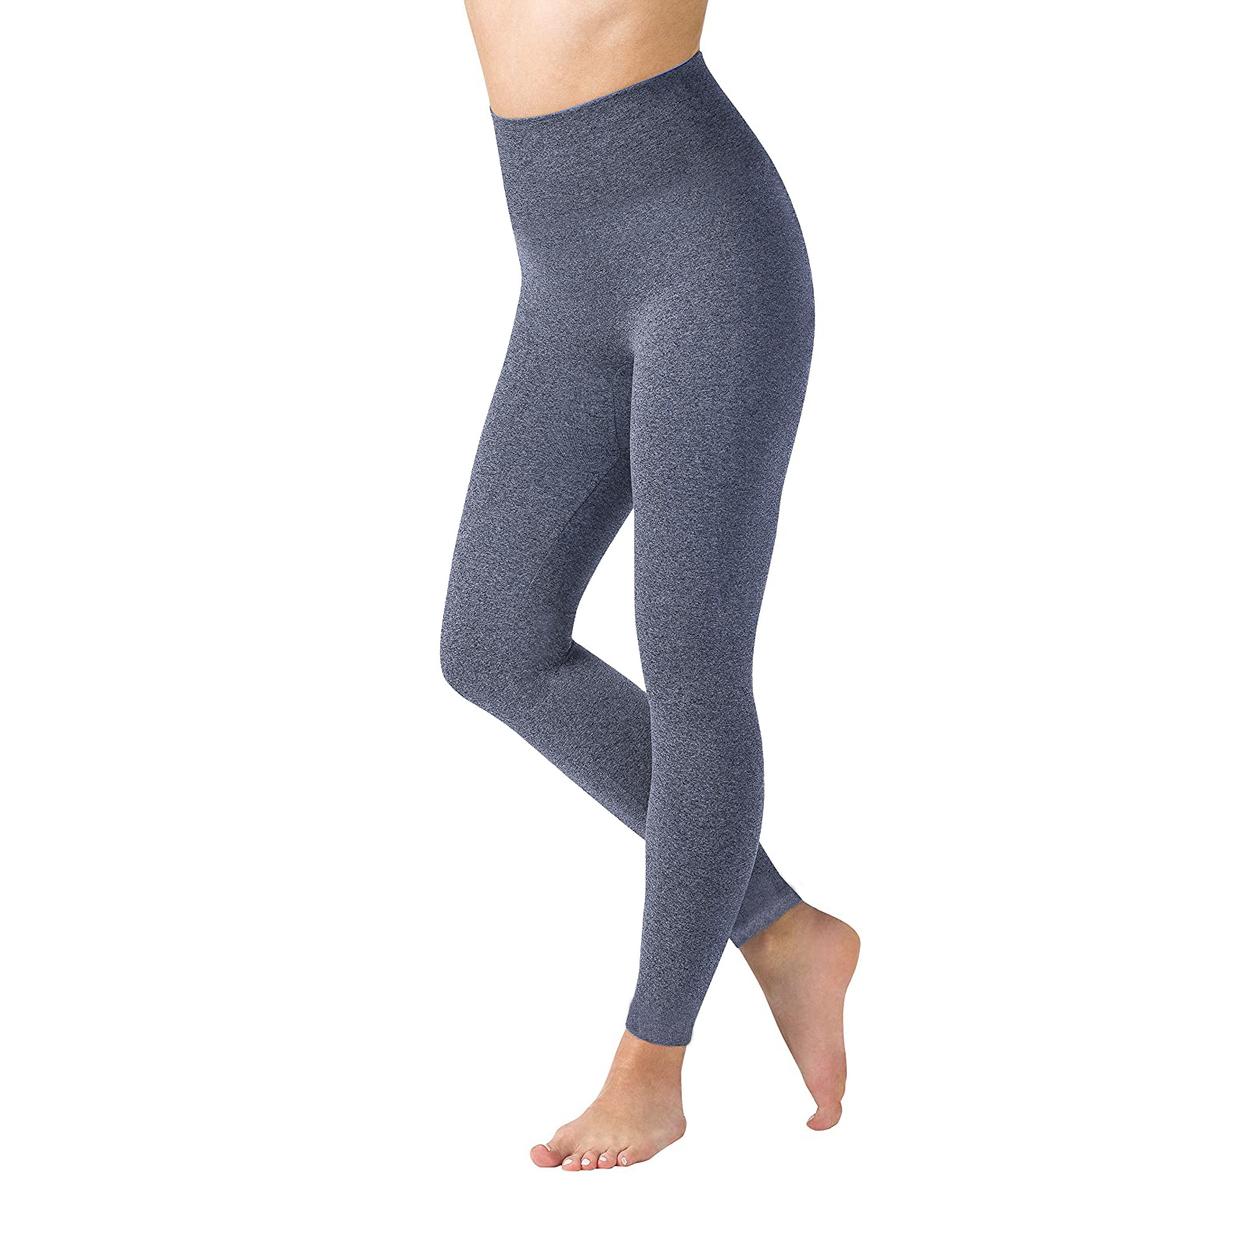 Women's High Waisted Ultra-Soft Fleece Lined Warm Marled Leggings(Available In Plus Sizes) - Charcoal, 1x